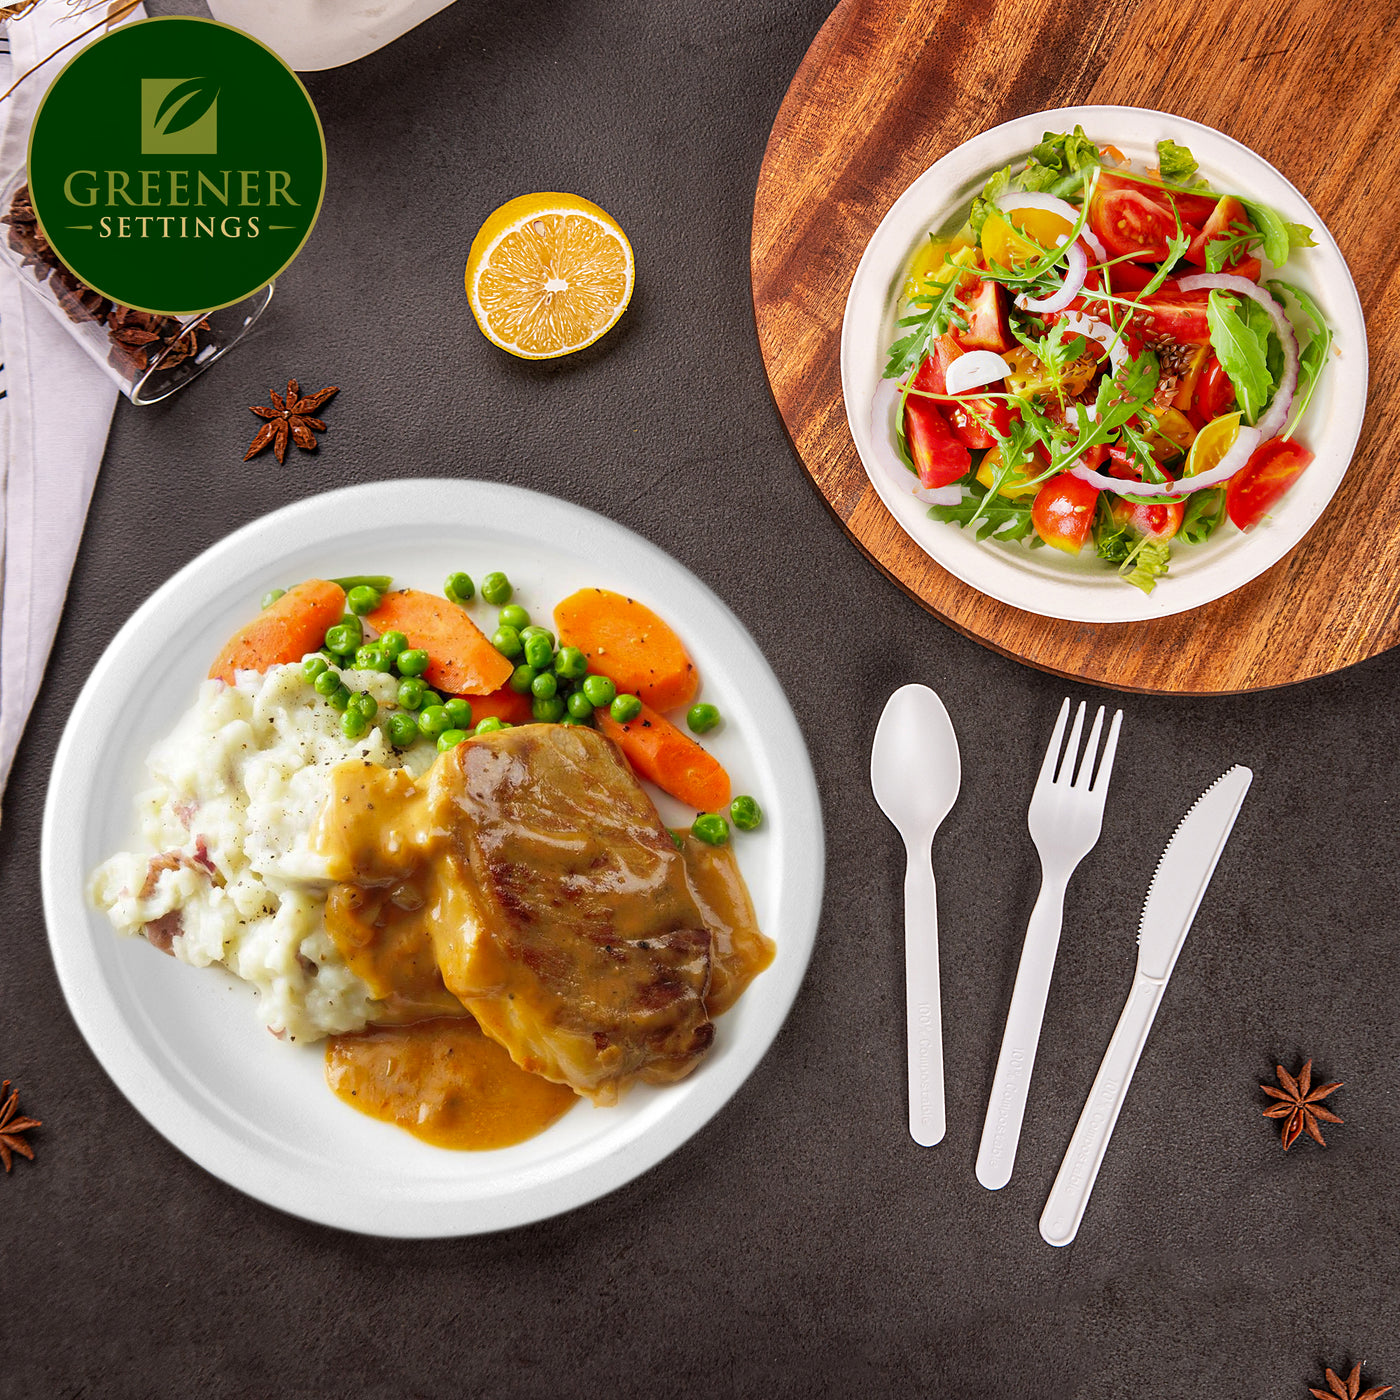 10 in. & 7 in. White Compostable Disposable Paper Plate Set Plus Cutlery [25 Guest Service] - Perfect Settings Tableware